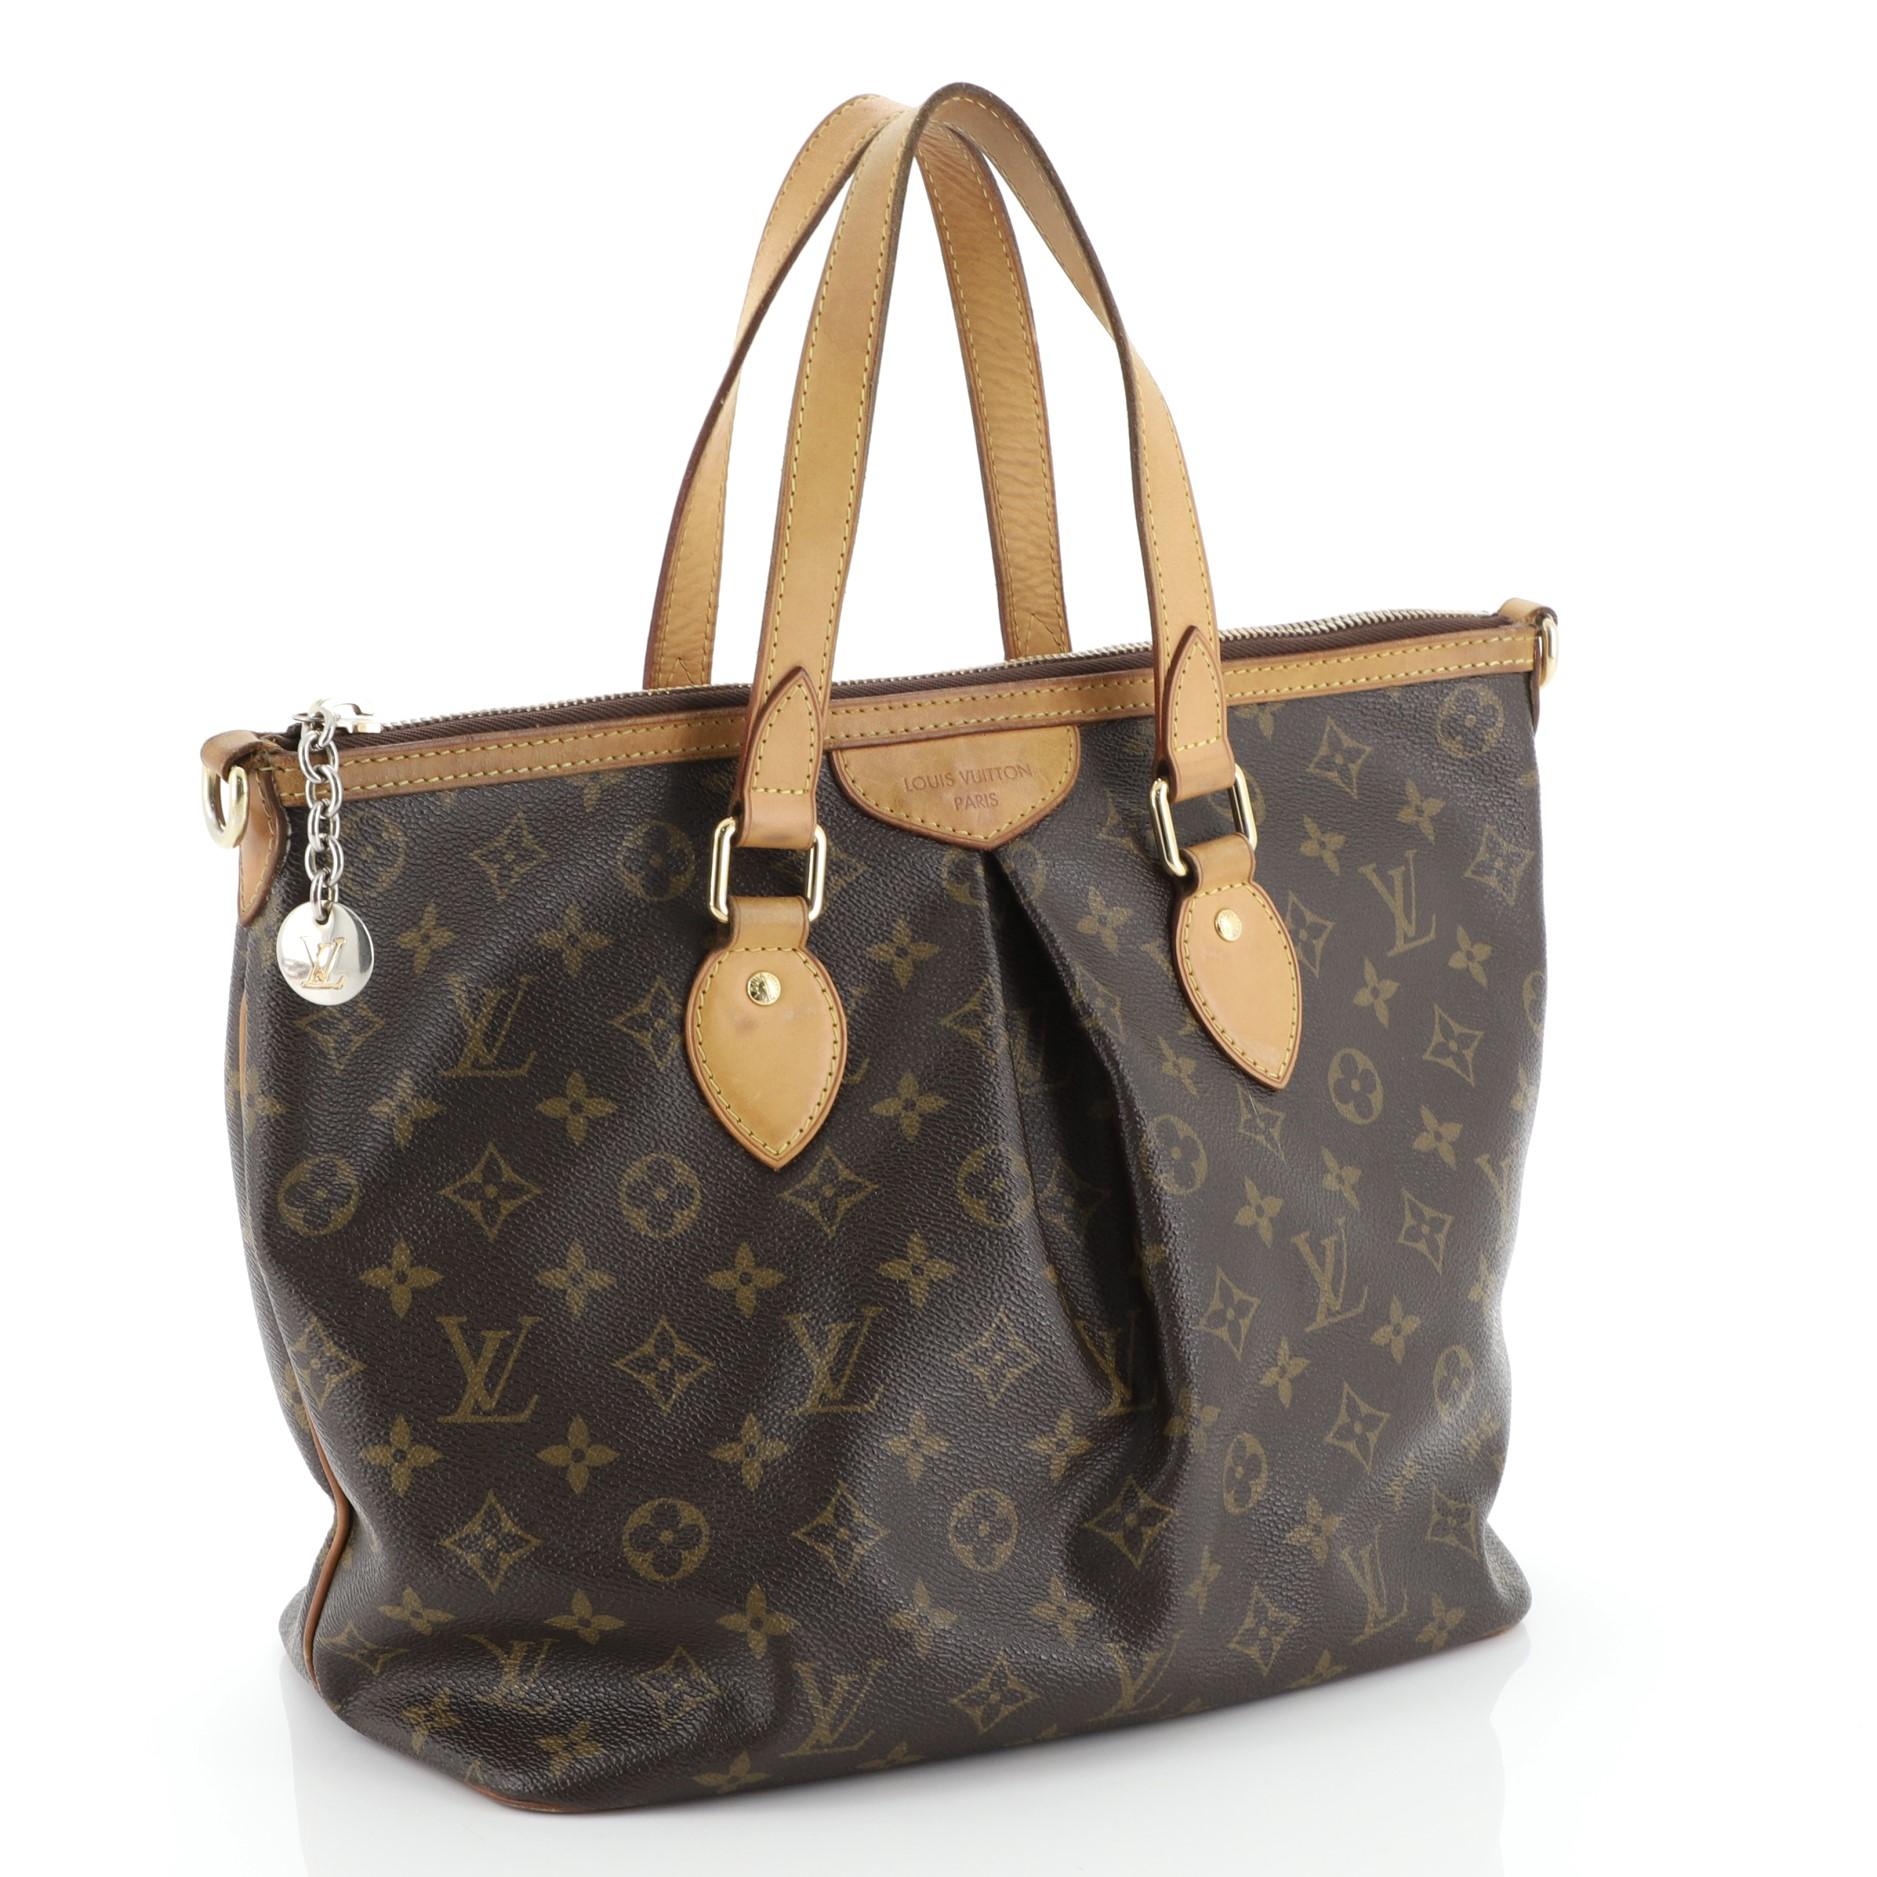 This Louis Vuitton Palermo Handbag Monogram Canvas PM, crafted from brown monogram coated canvas, features dual flat leather handles, vachetta leather trim, pleated silhouette, and gold-tone hardware. Its zip closure opens to a brown fabric interior